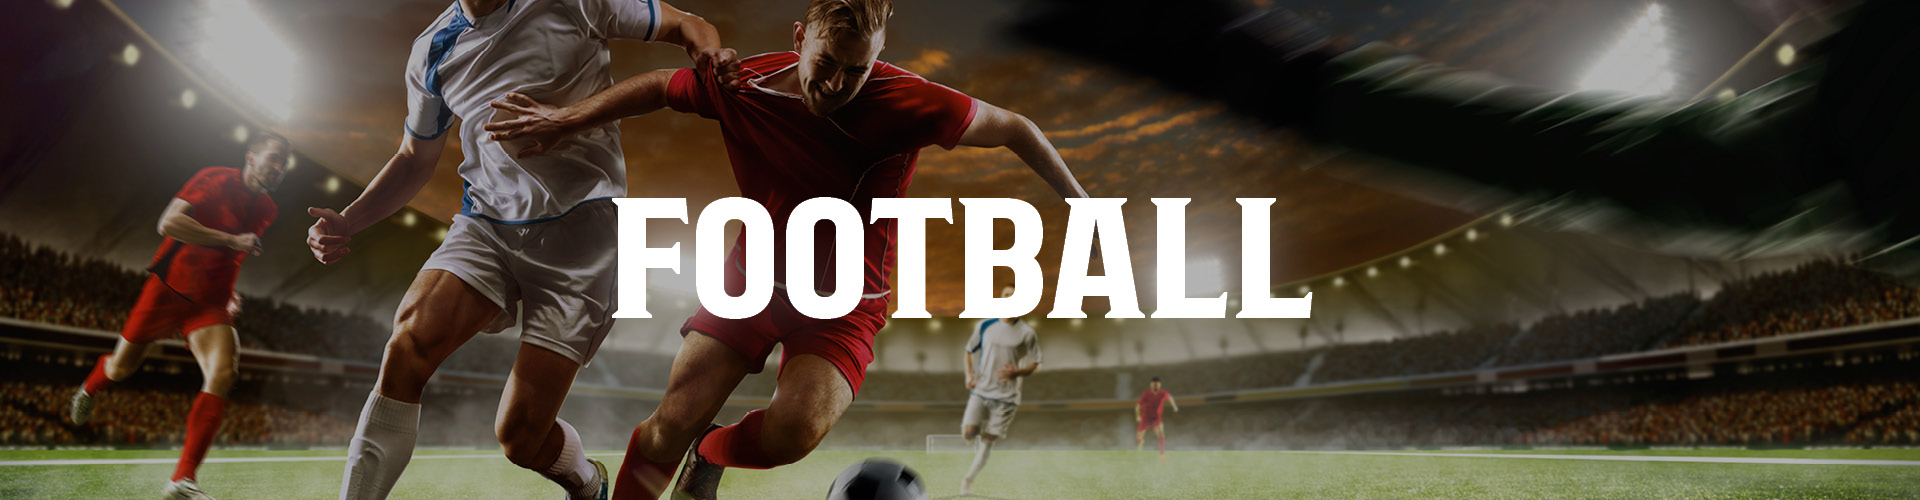 Watch Live Football in London at Steam Passage Pub